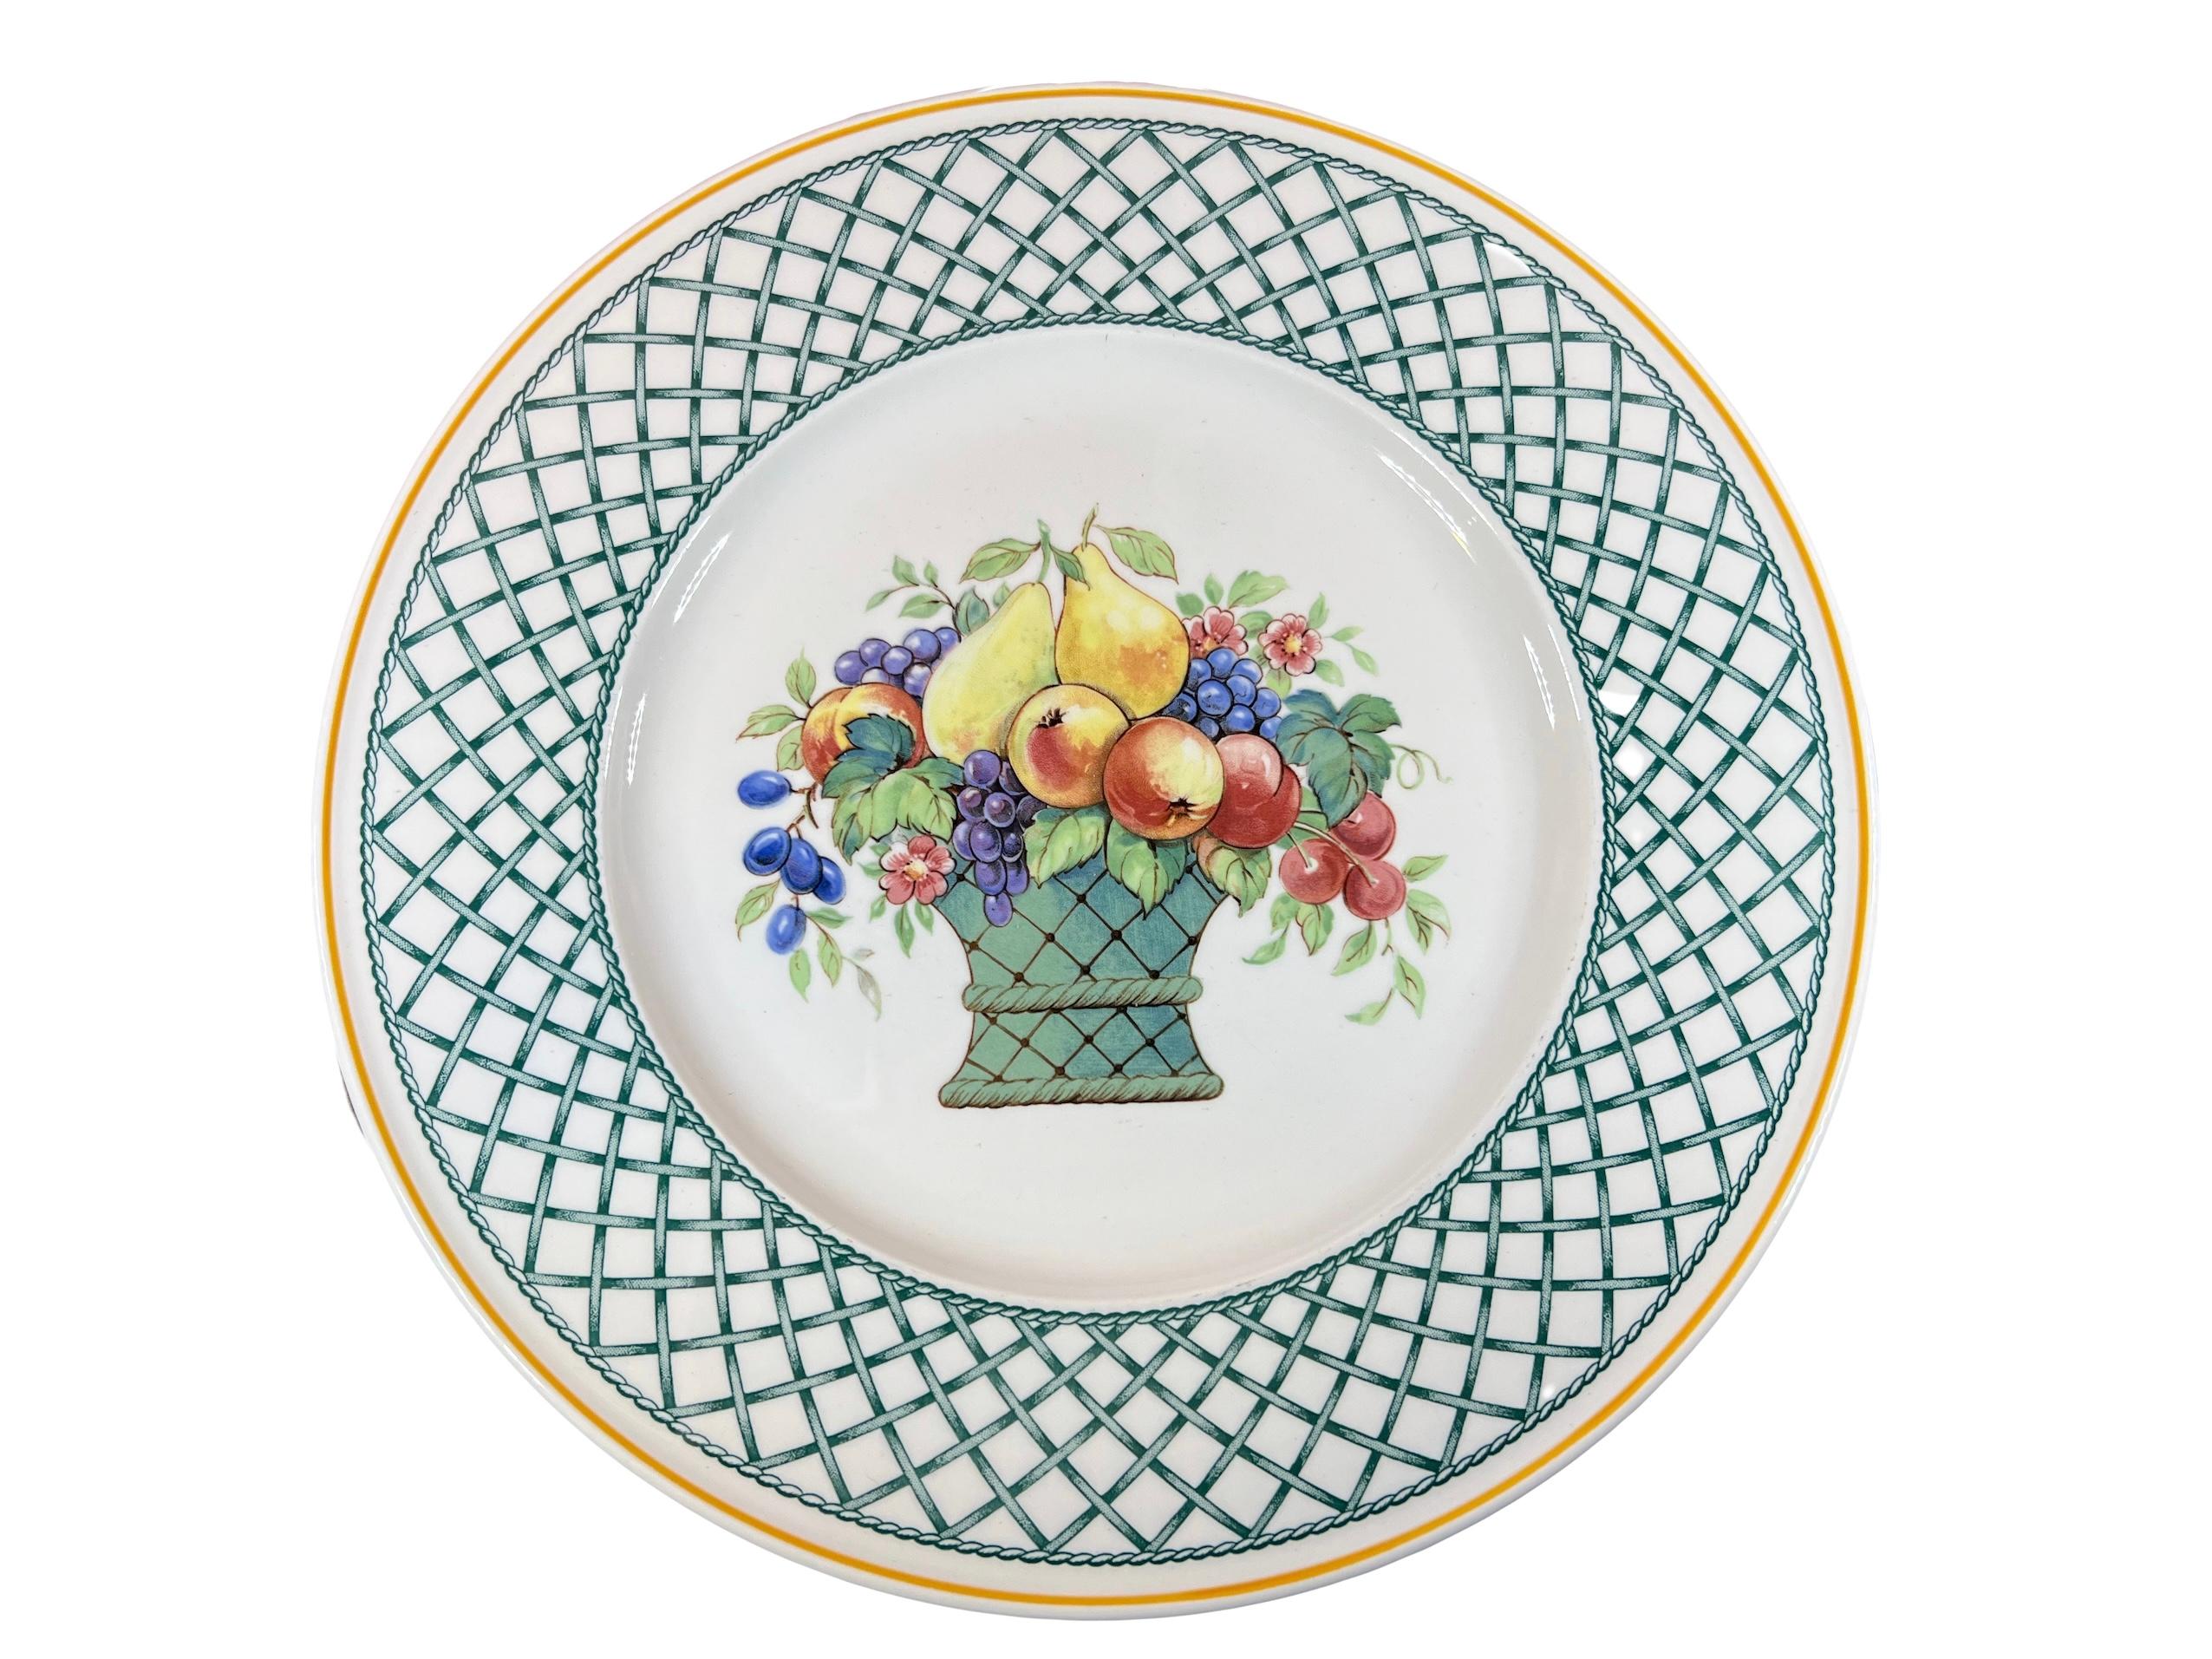 Enjoy harmonious porcelain settings with a nostalgic decor. Basket Garden is a modern twist on the tableware classic from the 1970s. The fruit basket with its characteristic grid pattern exudes traditional charm, while the modern shape of the